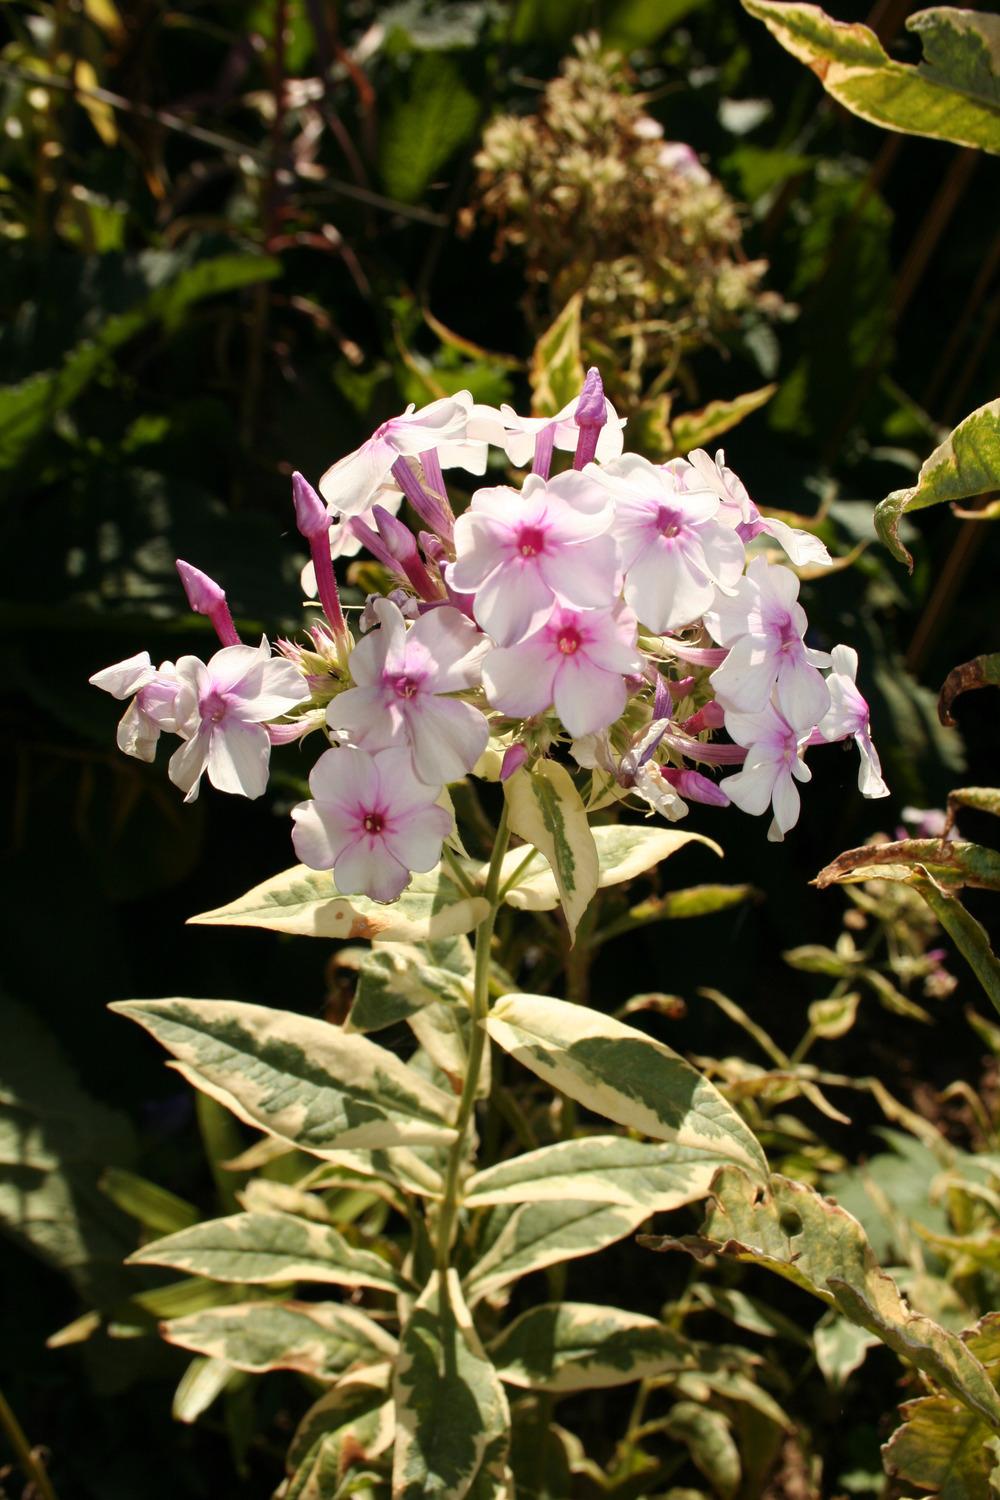 Photo of Variegated Garden Phlox (Phlox paniculata 'Frosted Elegance') uploaded by 4susiesjoy